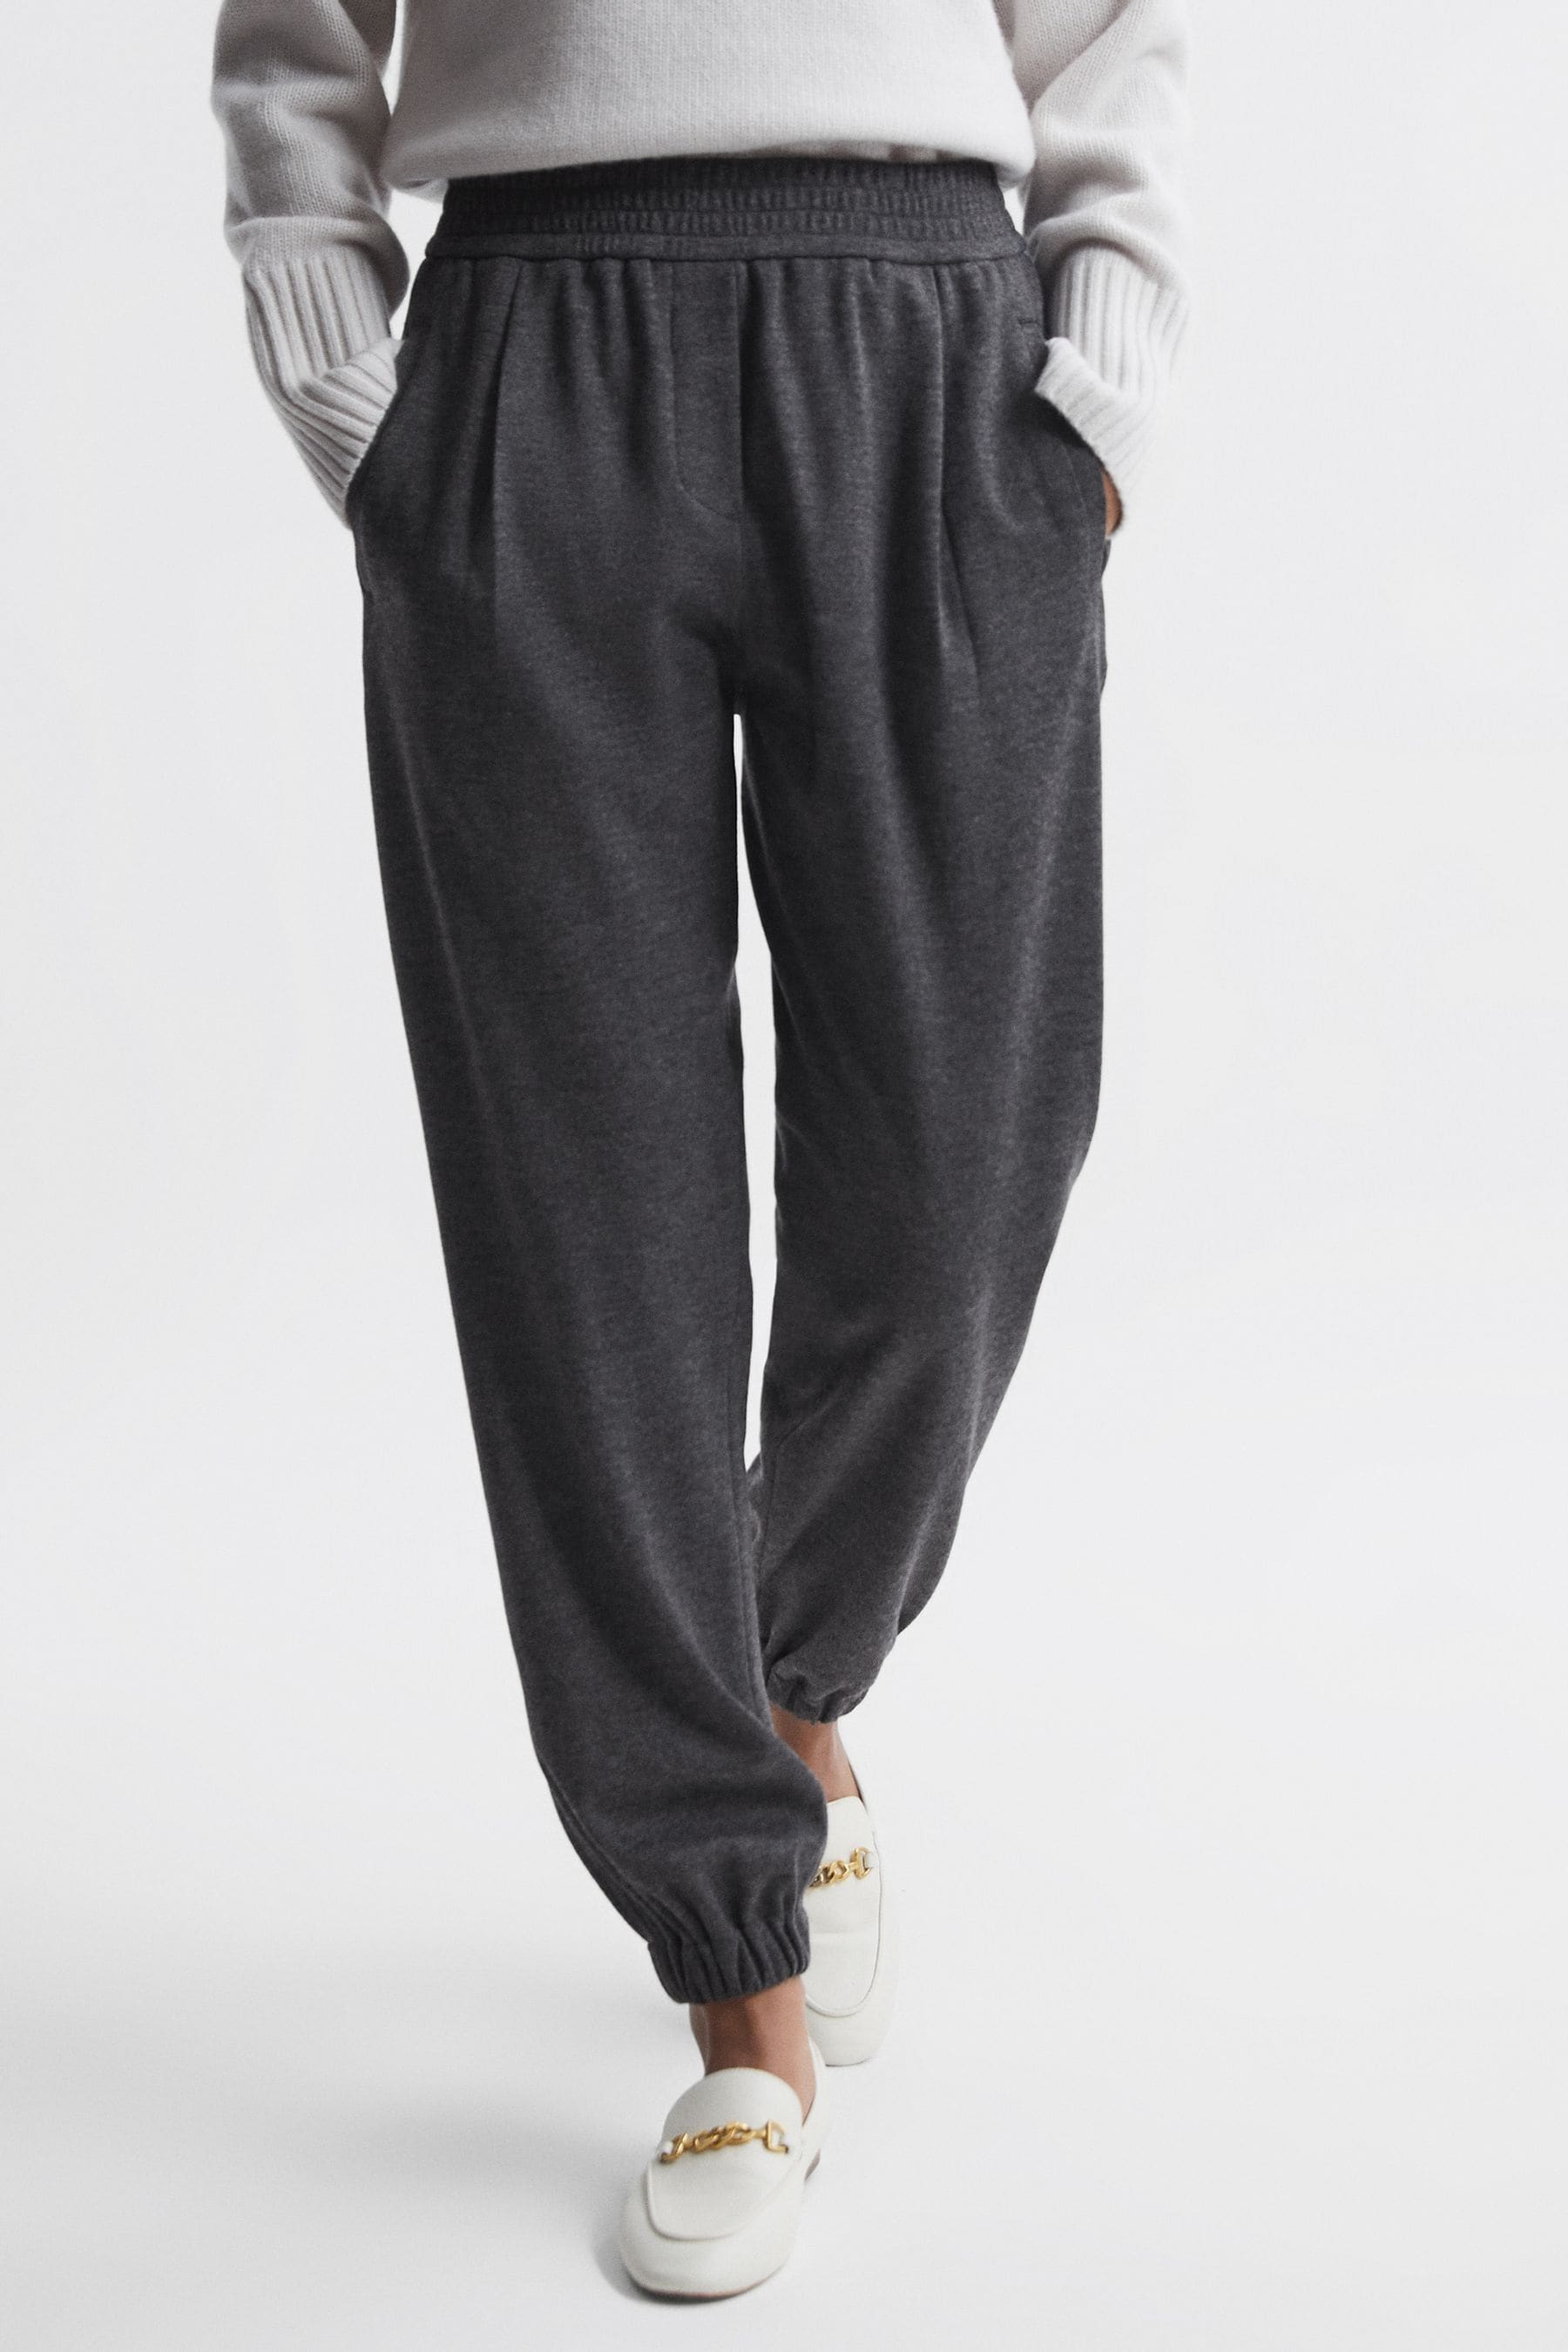 Reiss Karina - Charcoal Wool Elasticated Pleat Front Joggers, Us 10